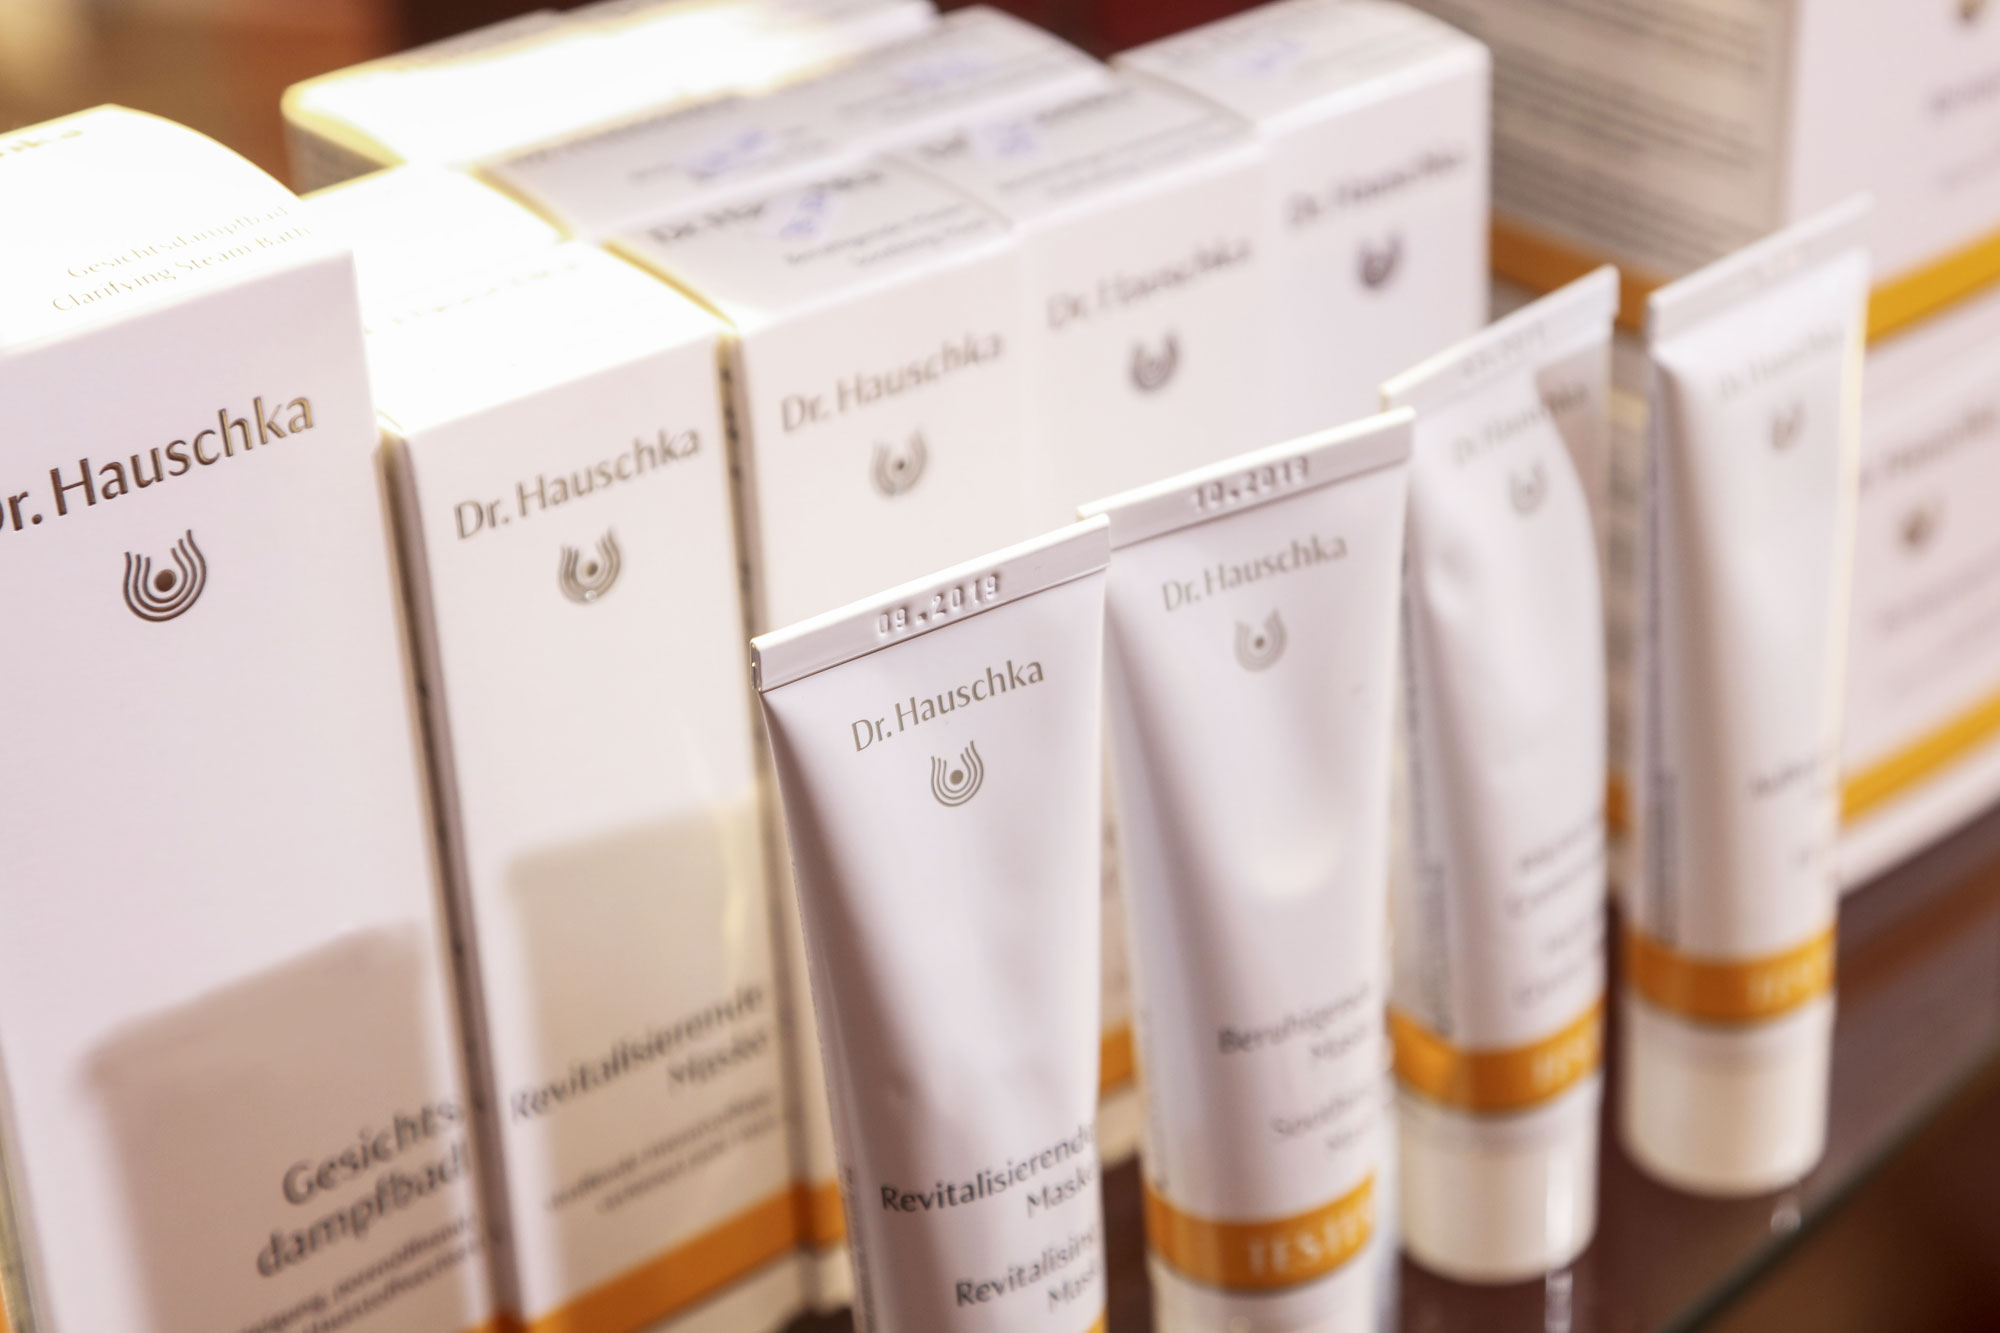 Dr. Hauschka care products: revitalizing mask and facial steam bath